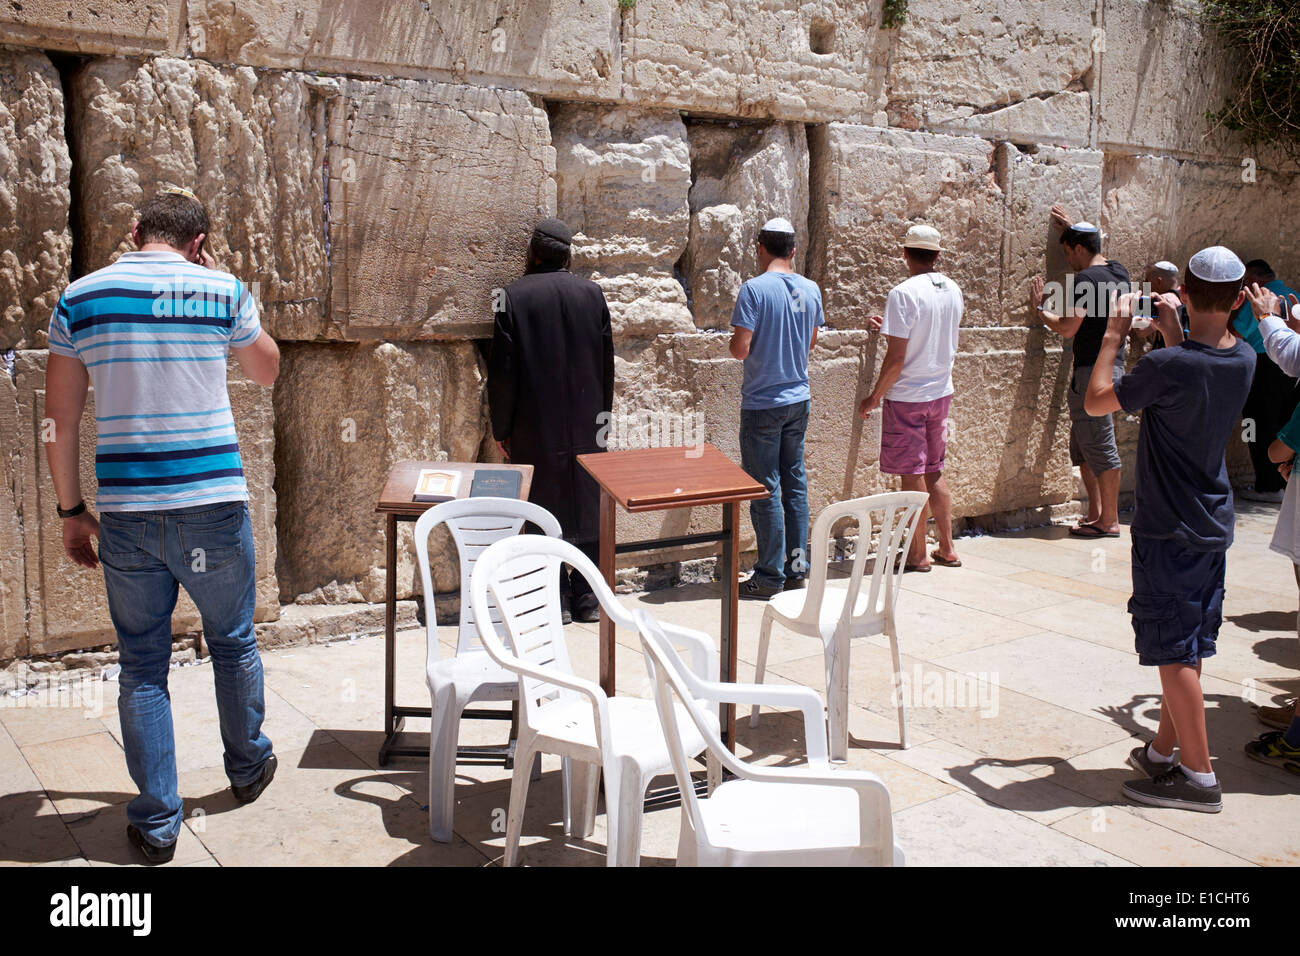 Tourists and locals praying at The Wailing Wall in Jerusalem, Israel Stock Photo